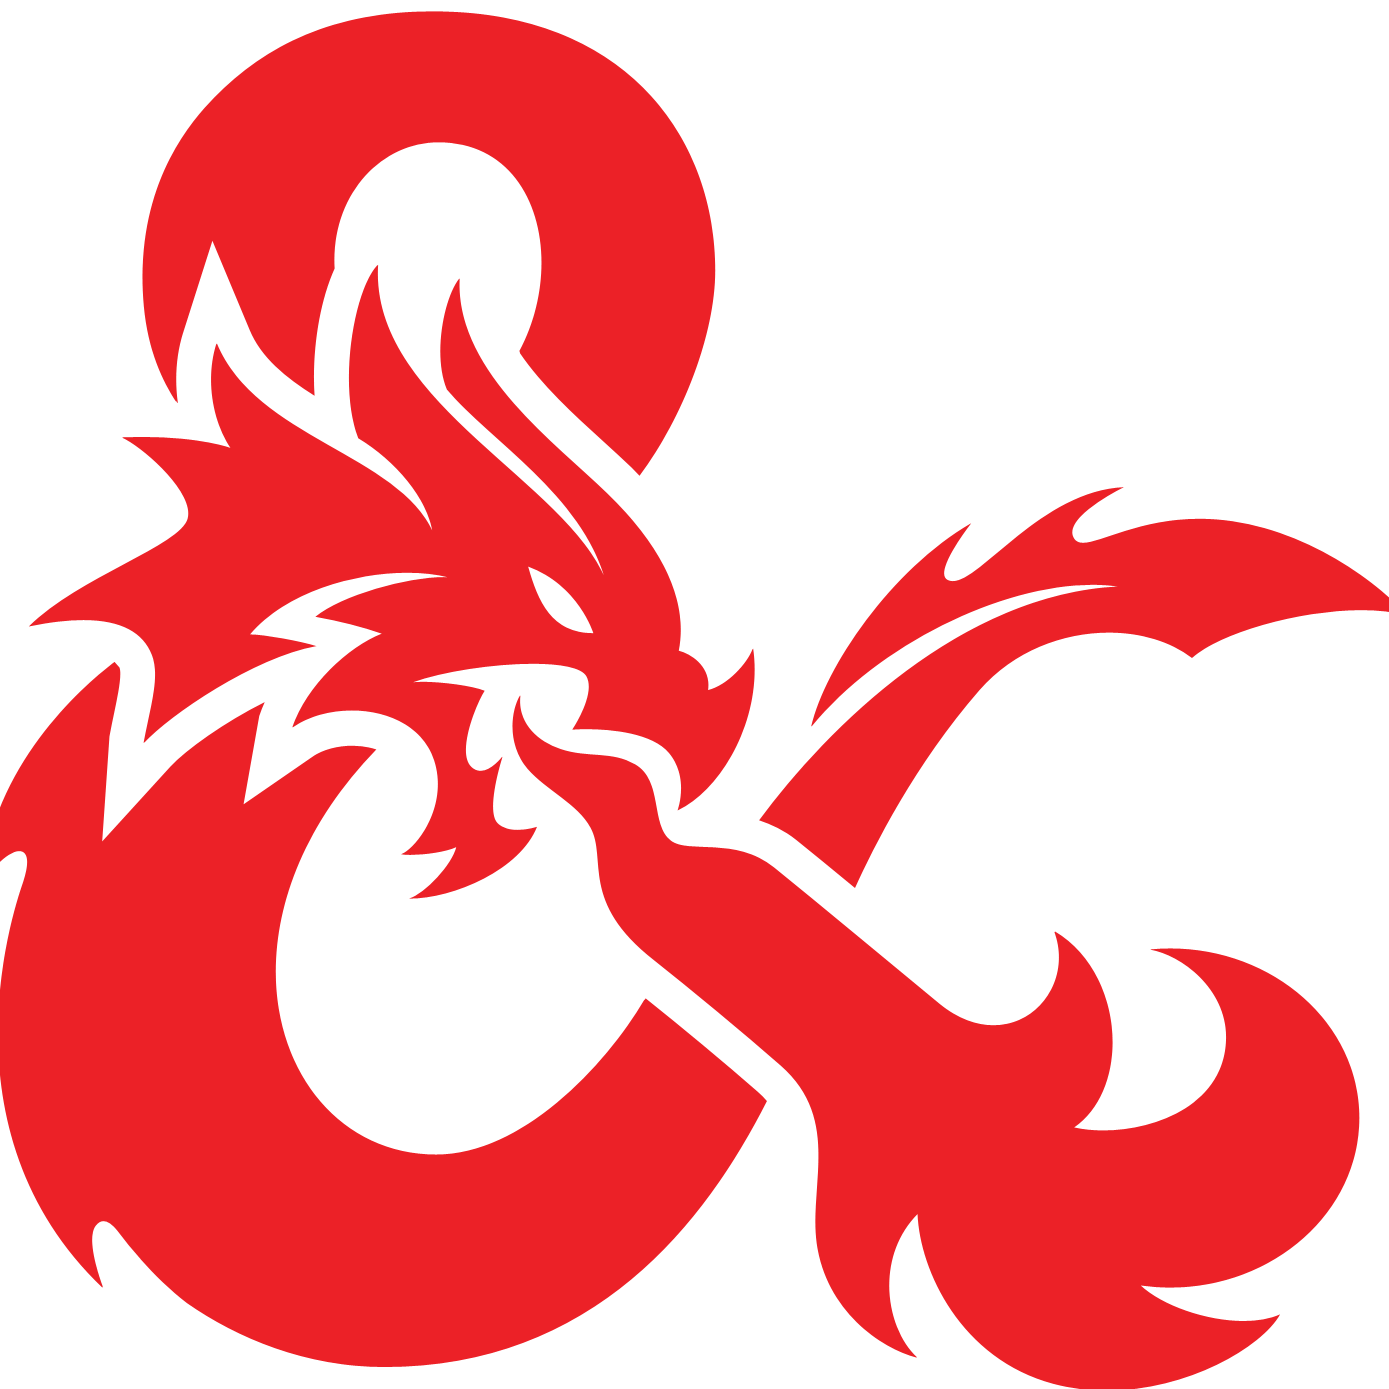 image of a dragon forming the and symbol